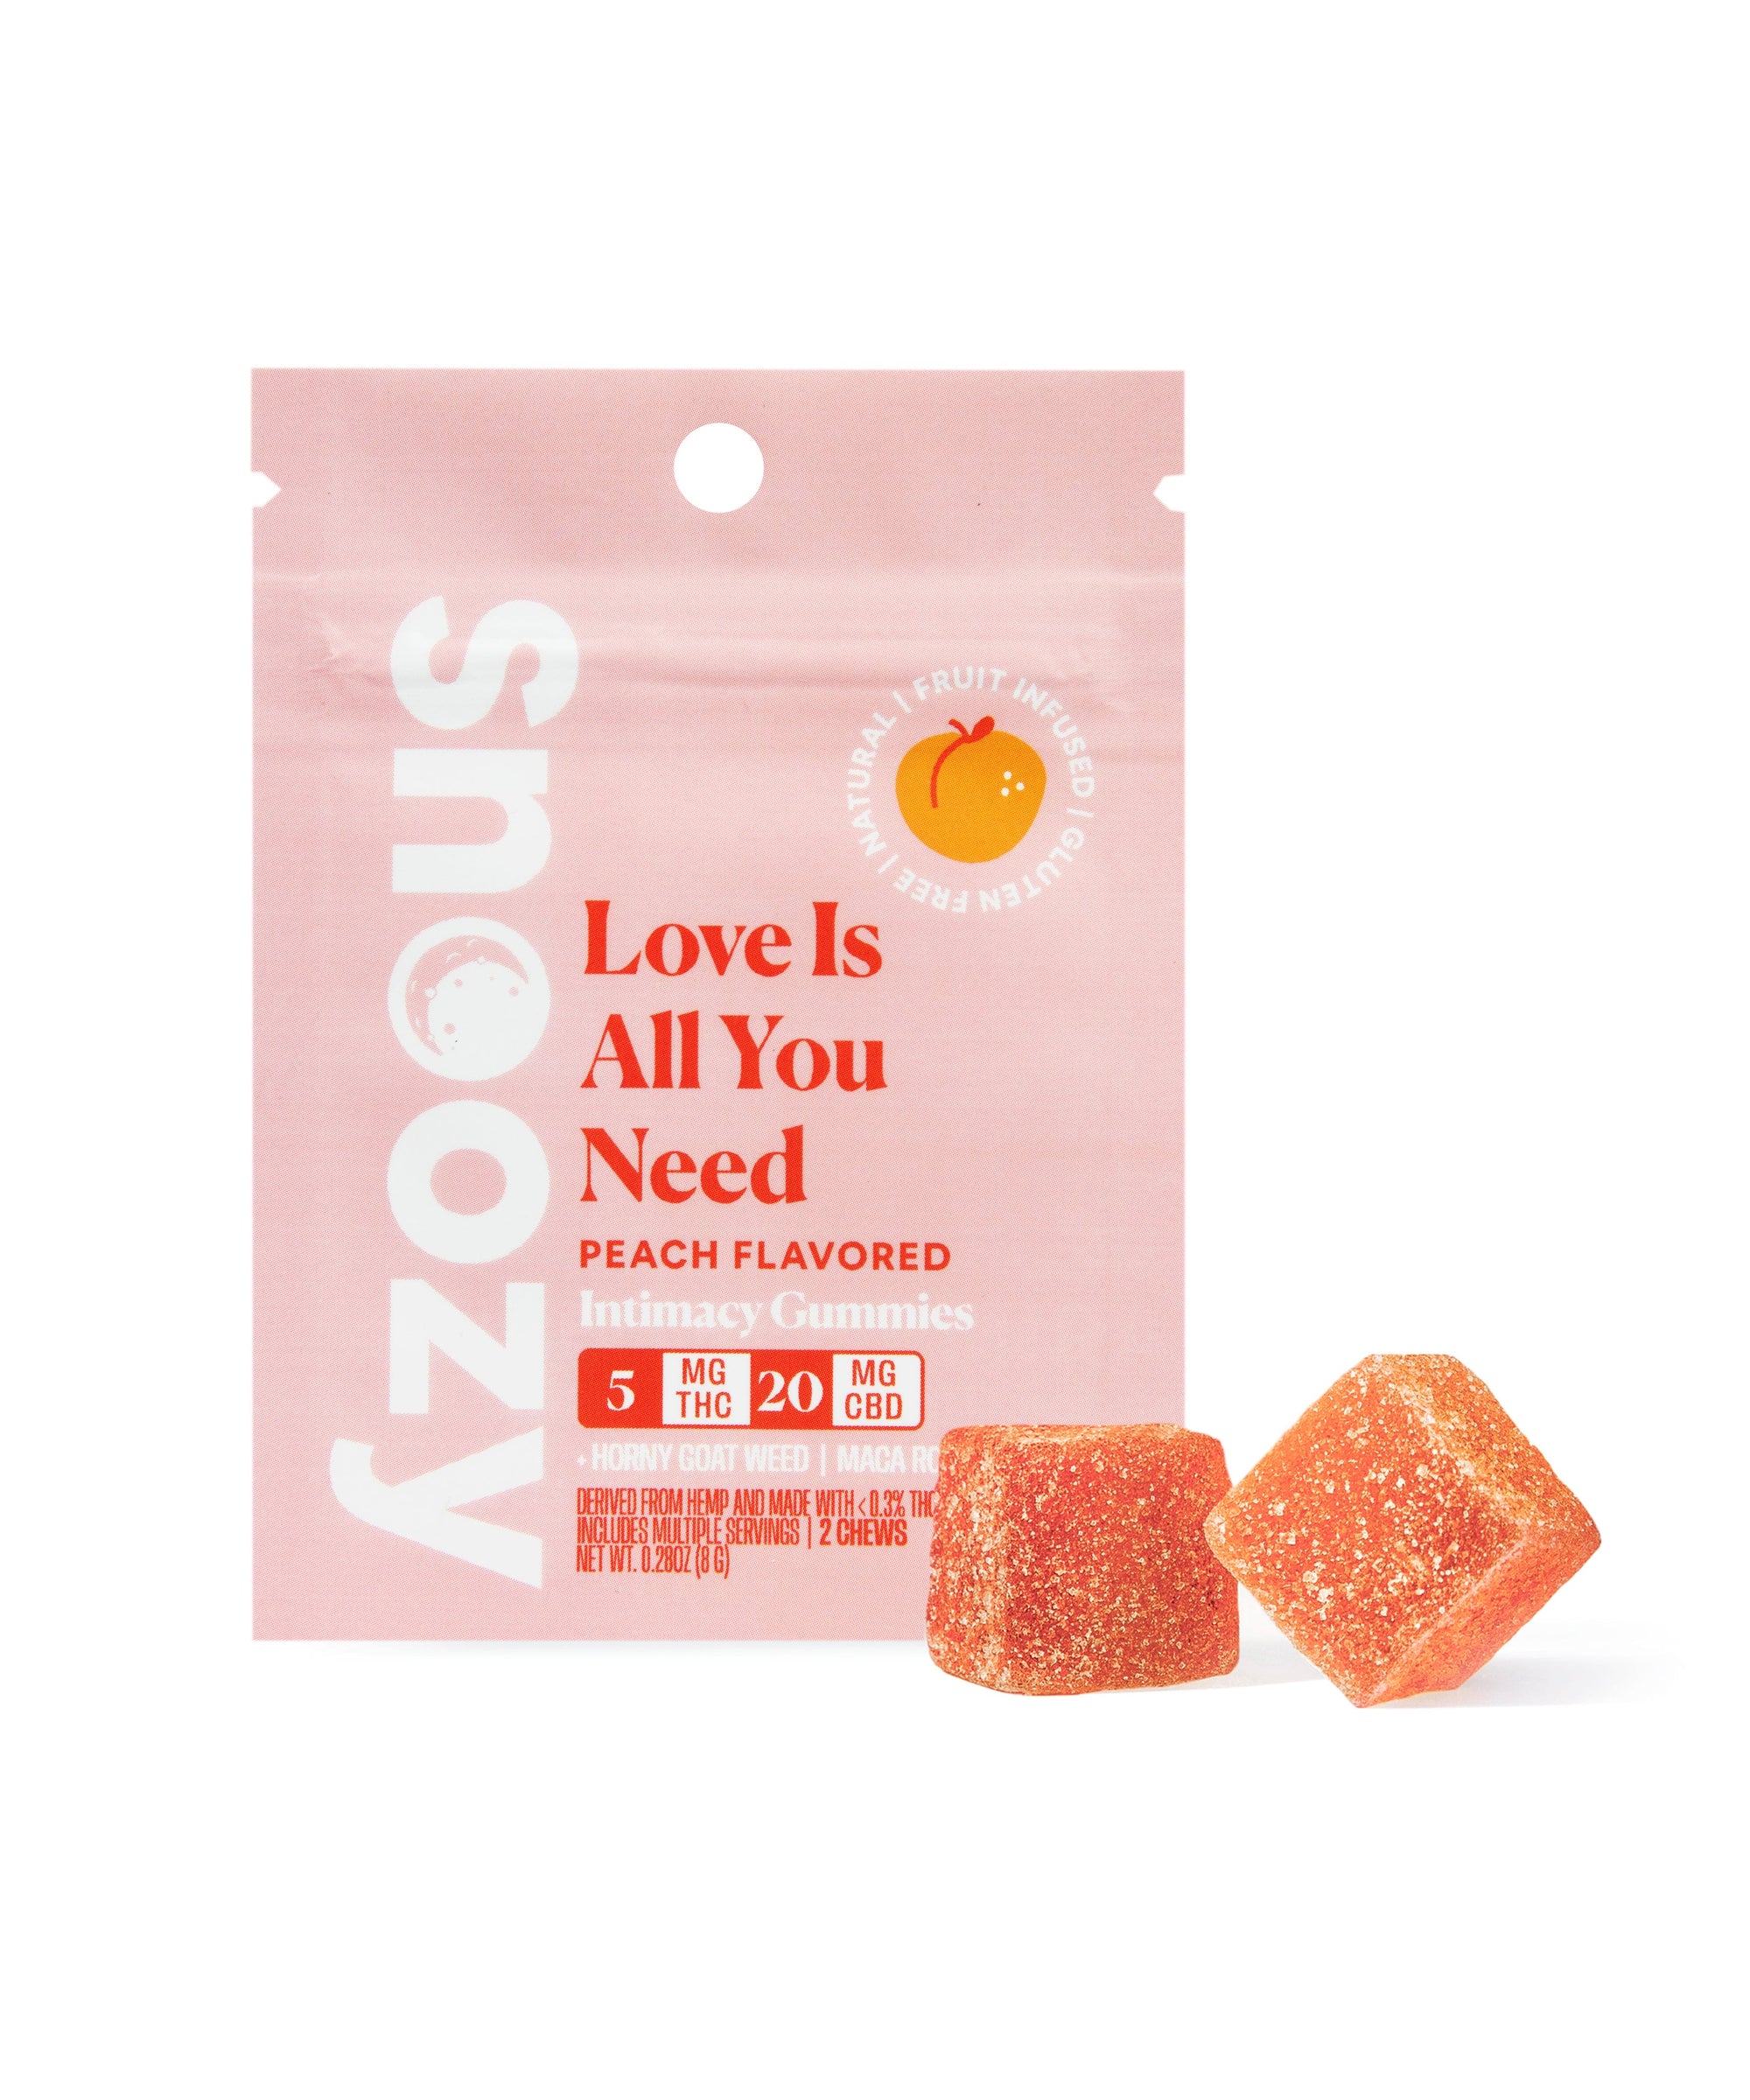 (2 Pack) Love Is All You Need: Intimacy Gummies Wholesale